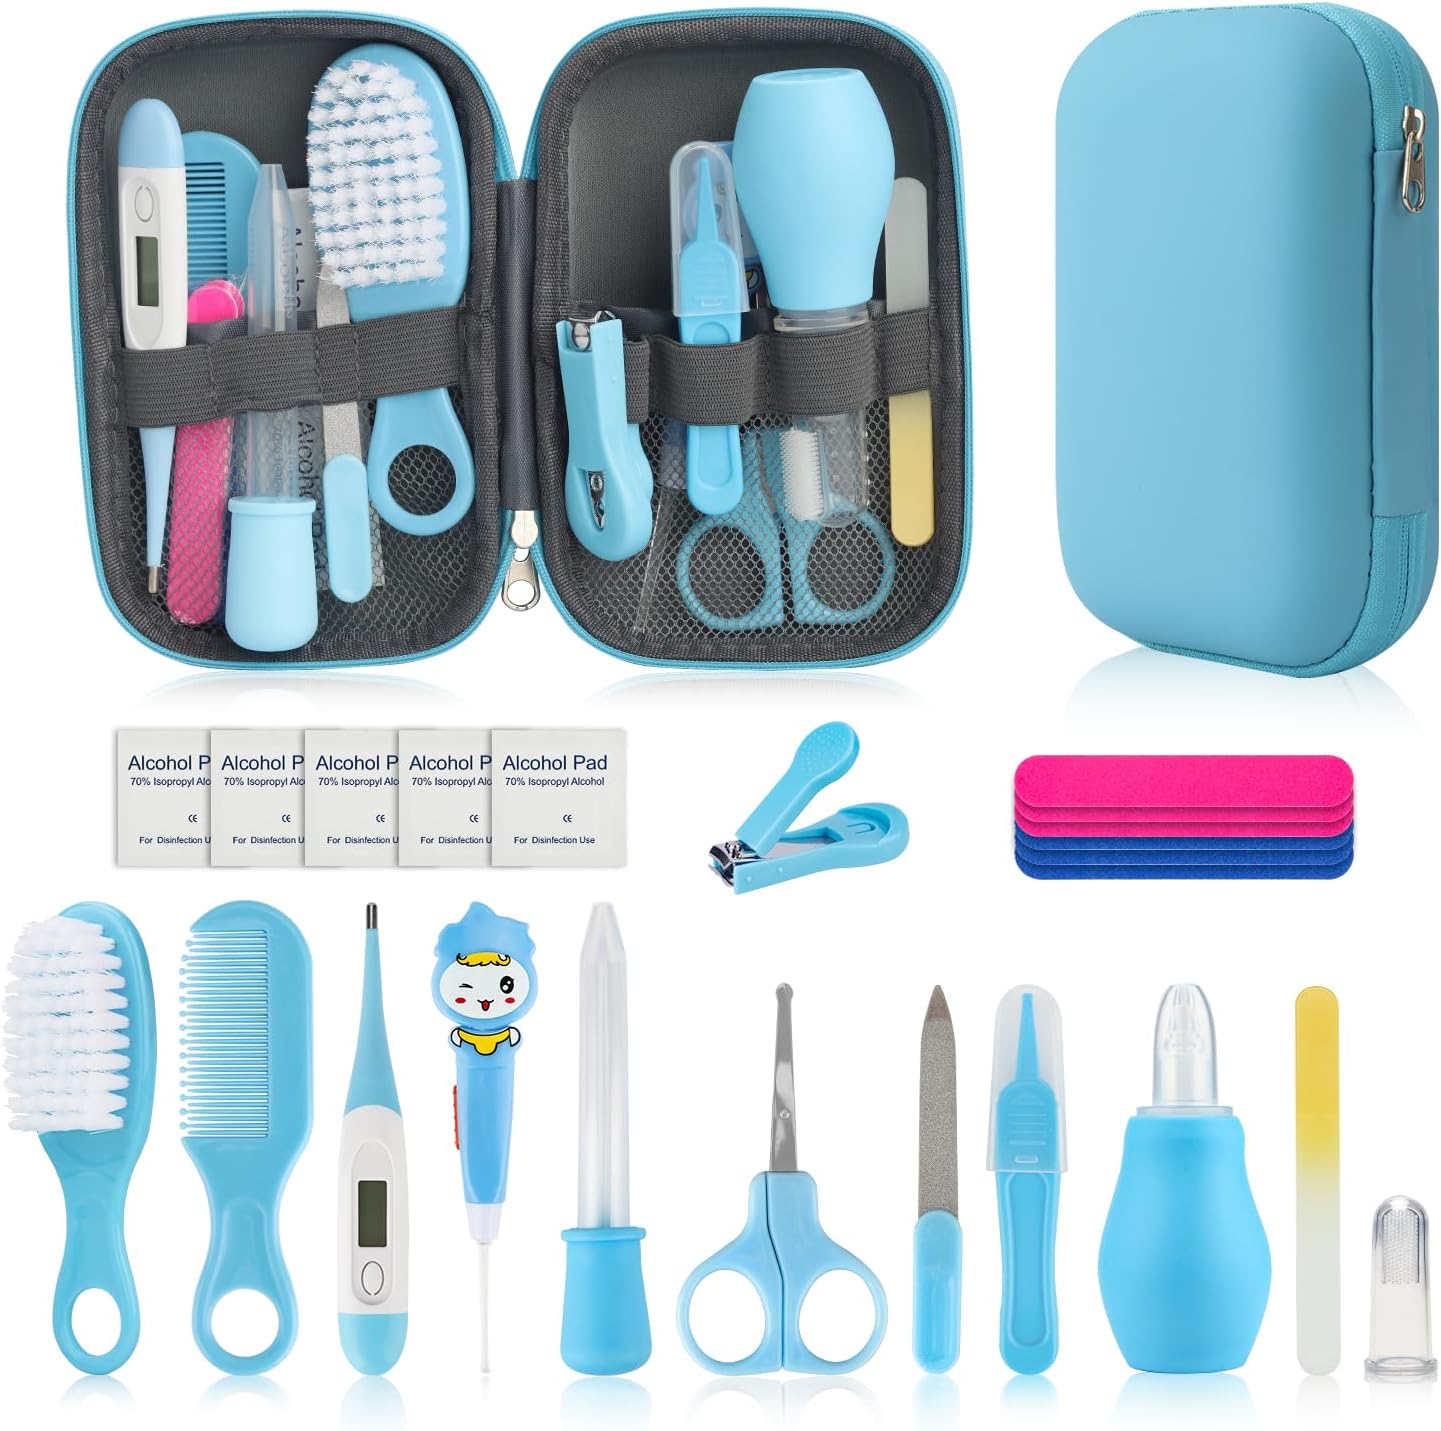 Baby Grooming Kit, Infant Safety Care Set with Hair Brush Comb Nail Clipper Nasal Aspirator Ear Cleaner,Baby Essentials Kit for Newborn Girls Boys